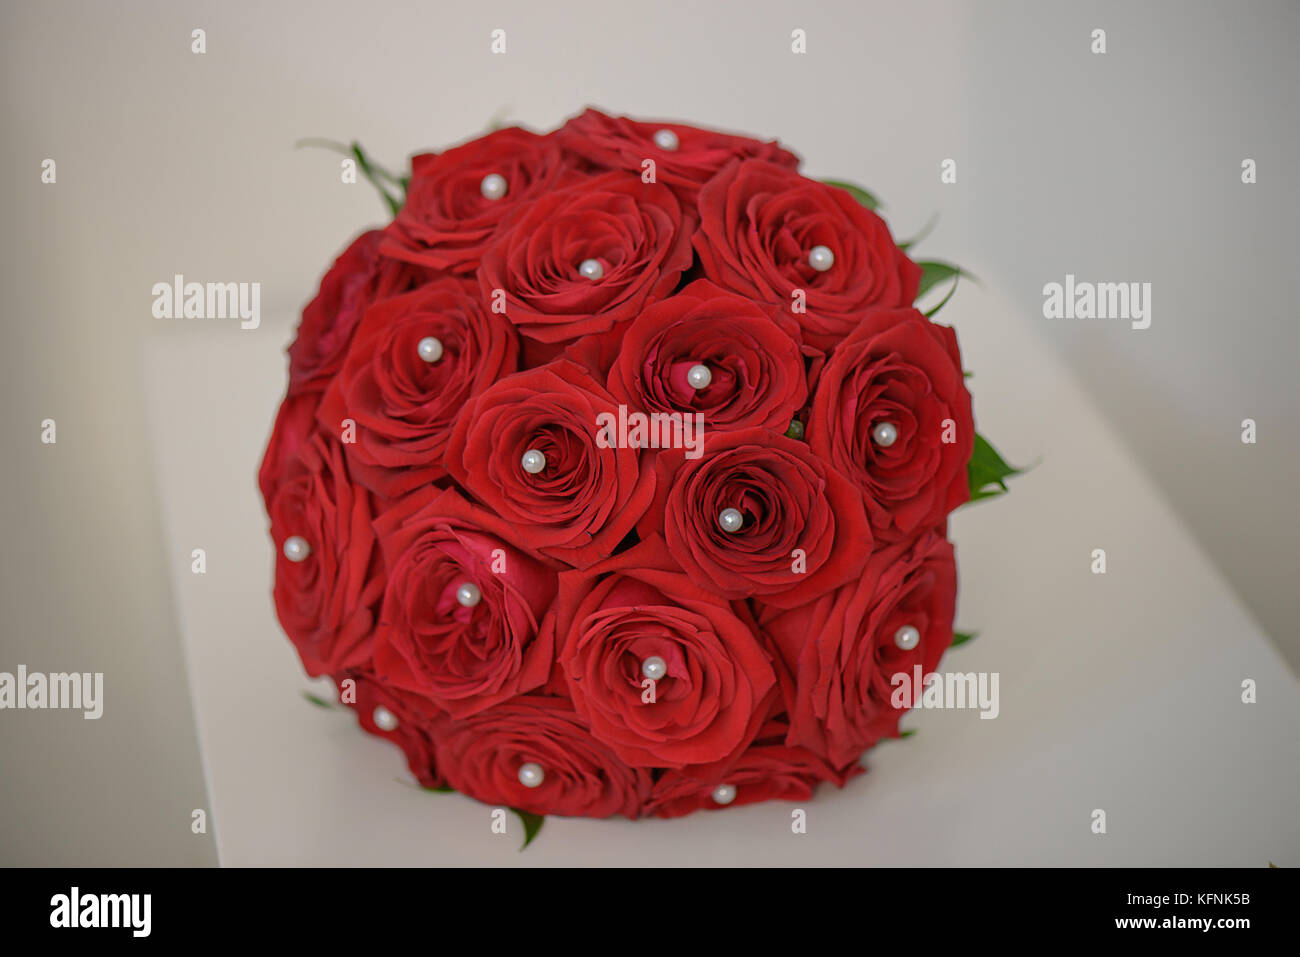 Sophisticated round wedding bouquet with red roses and pearl drops positioned on a white minimalist table Stock Photo